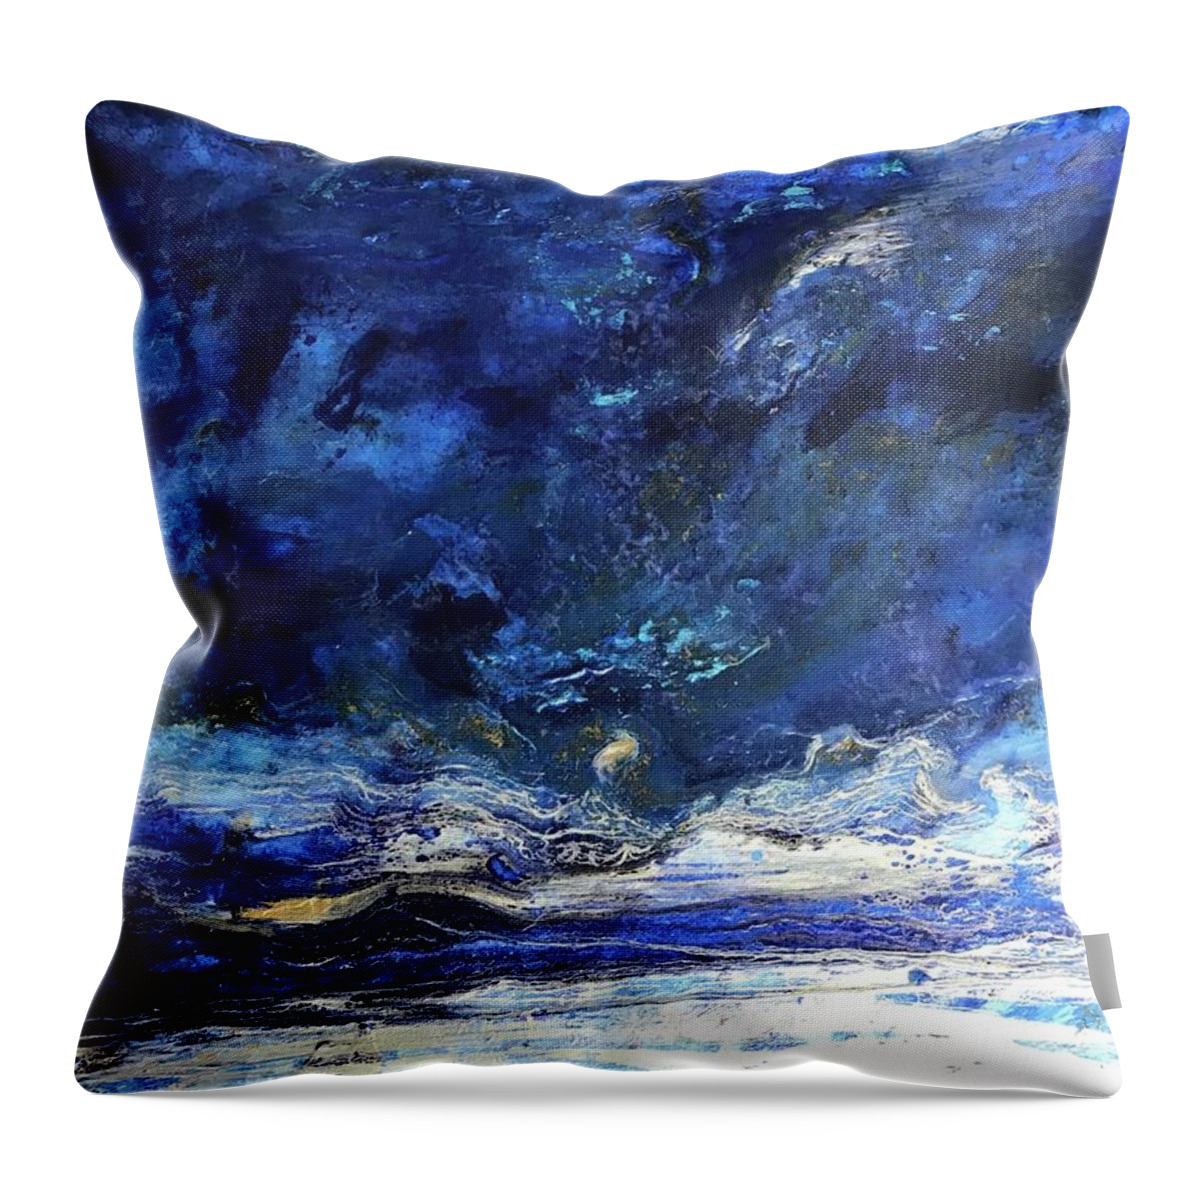 Galaxy Throw Pillow featuring the painting Galactica by Medge Jaspan